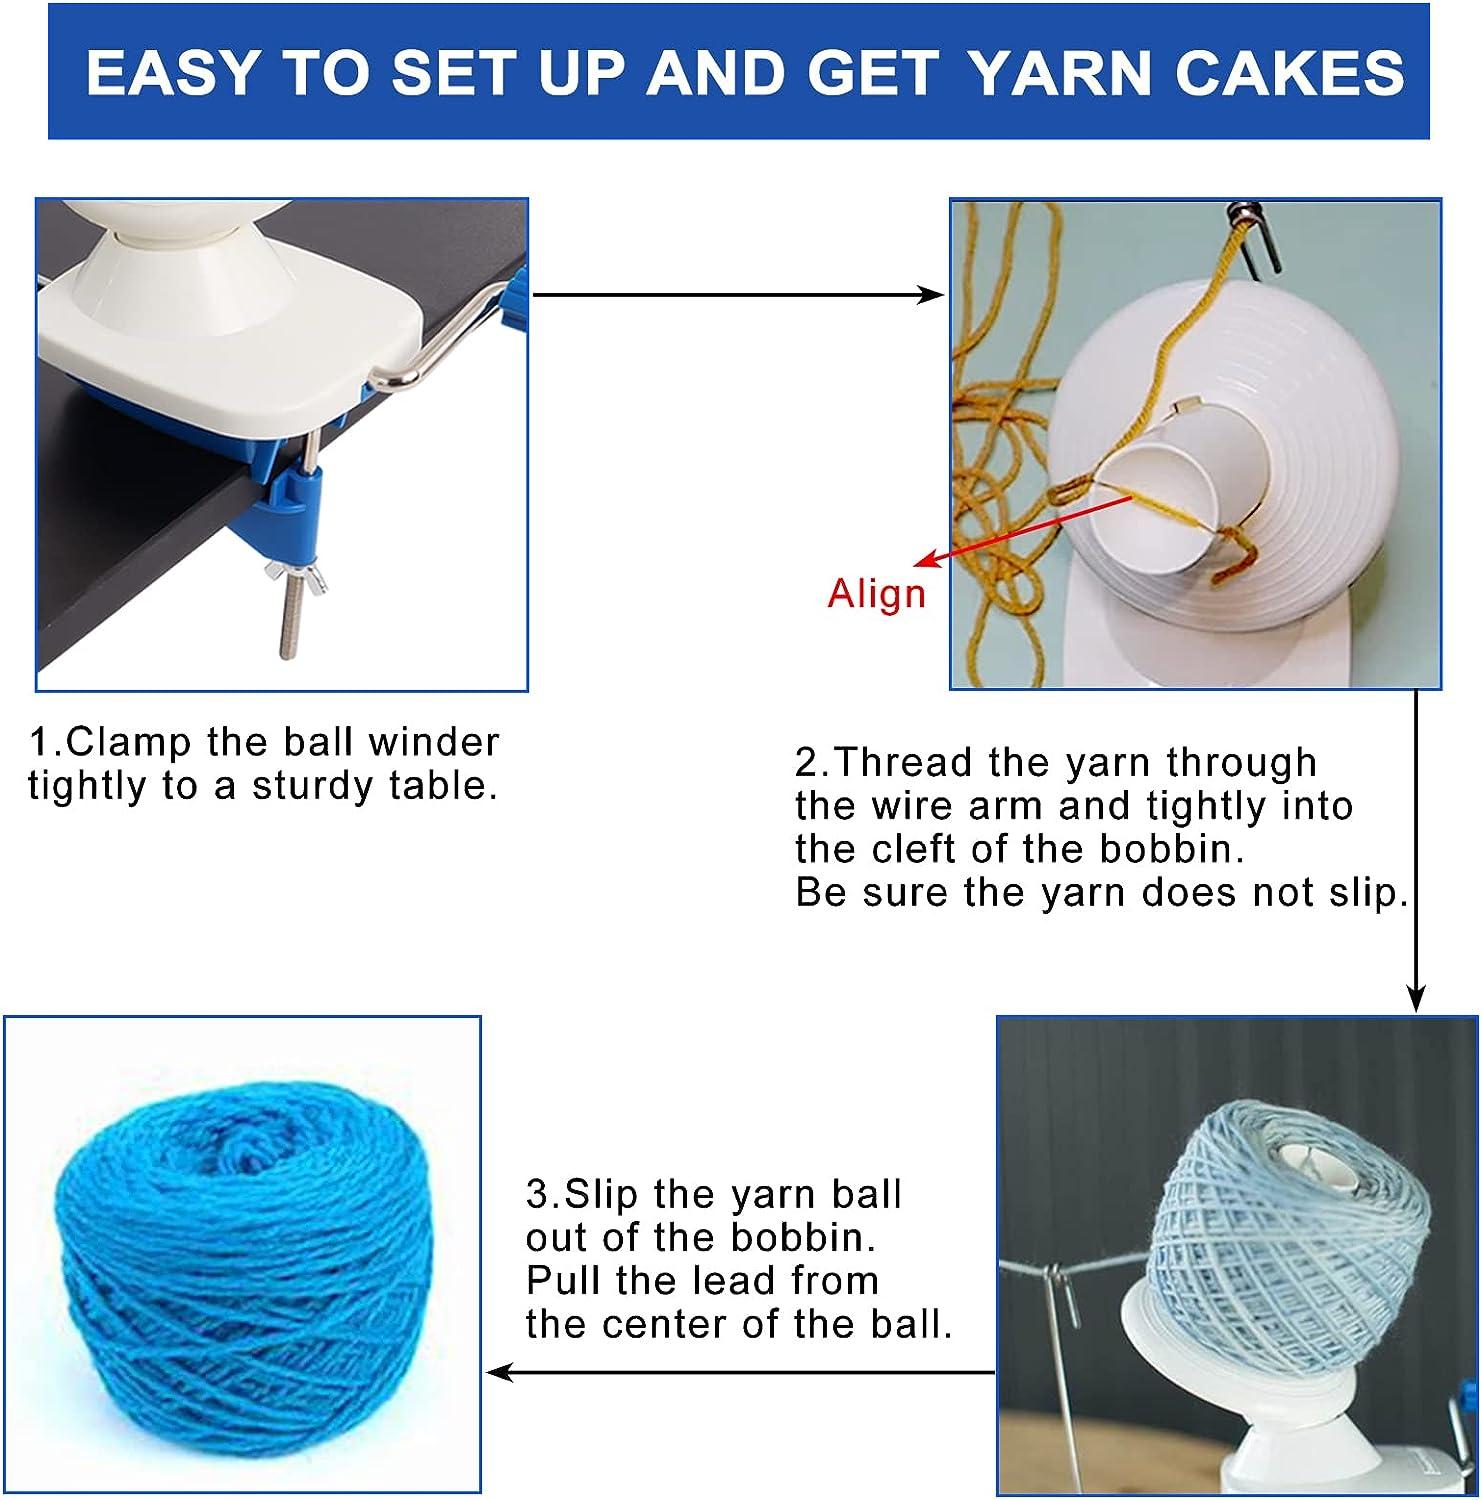 Yarn Ball Winder for Knitting Hand-Operated, Manual Wool Winder Holder for  Swift Yarn Fiber String Ball, 4 Ounce Capacity, Knitting Needles Set  Included